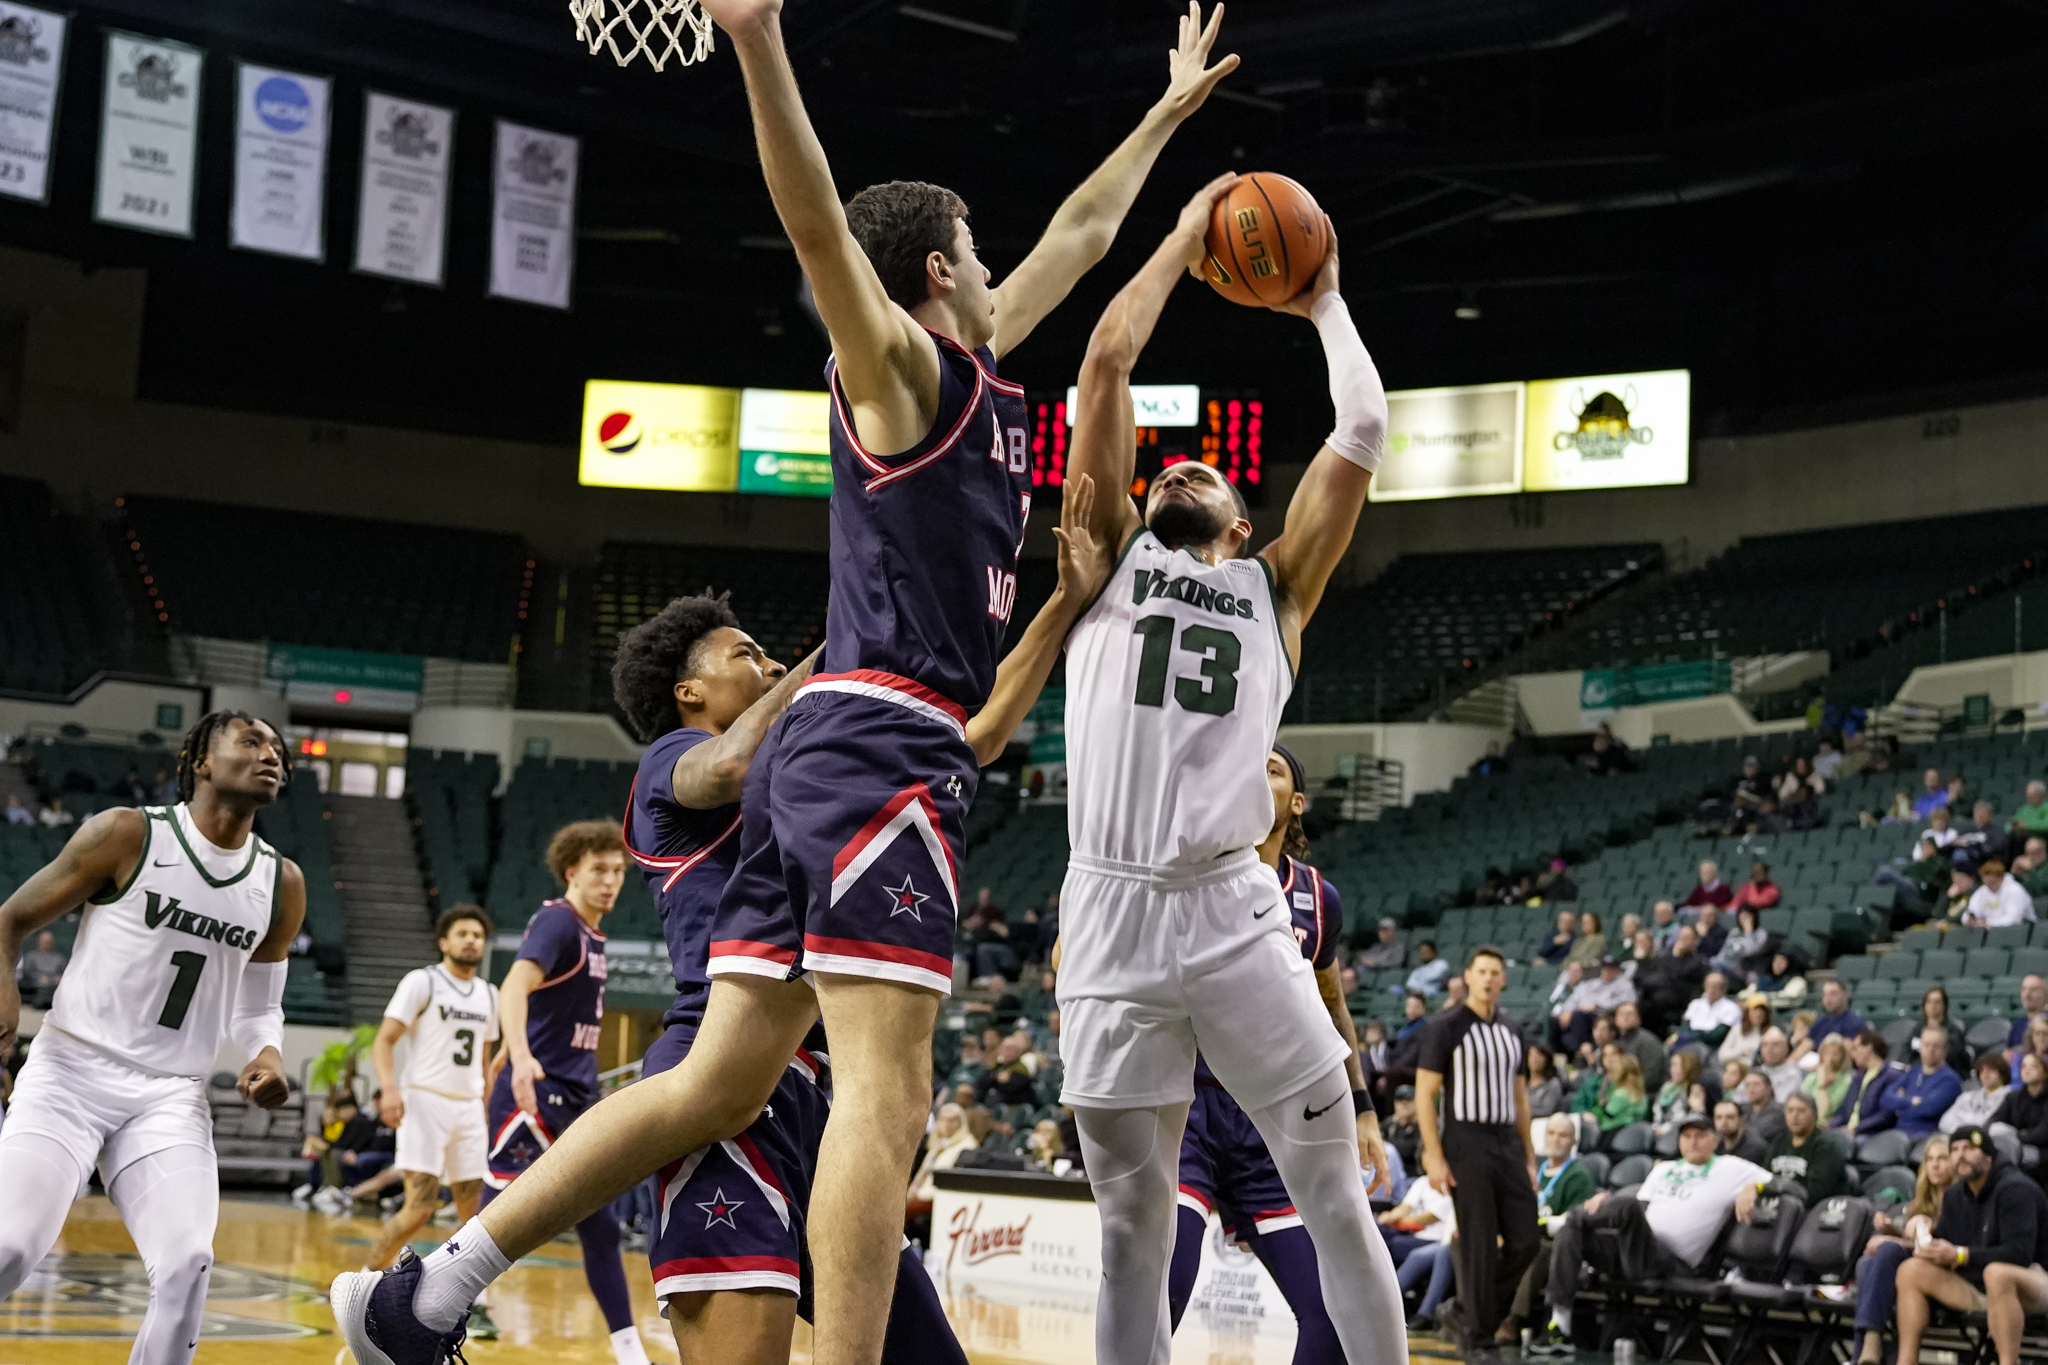 Cleveland State Men’s Basketball Picks Up Come-From-Behind Win Over Robert Morris